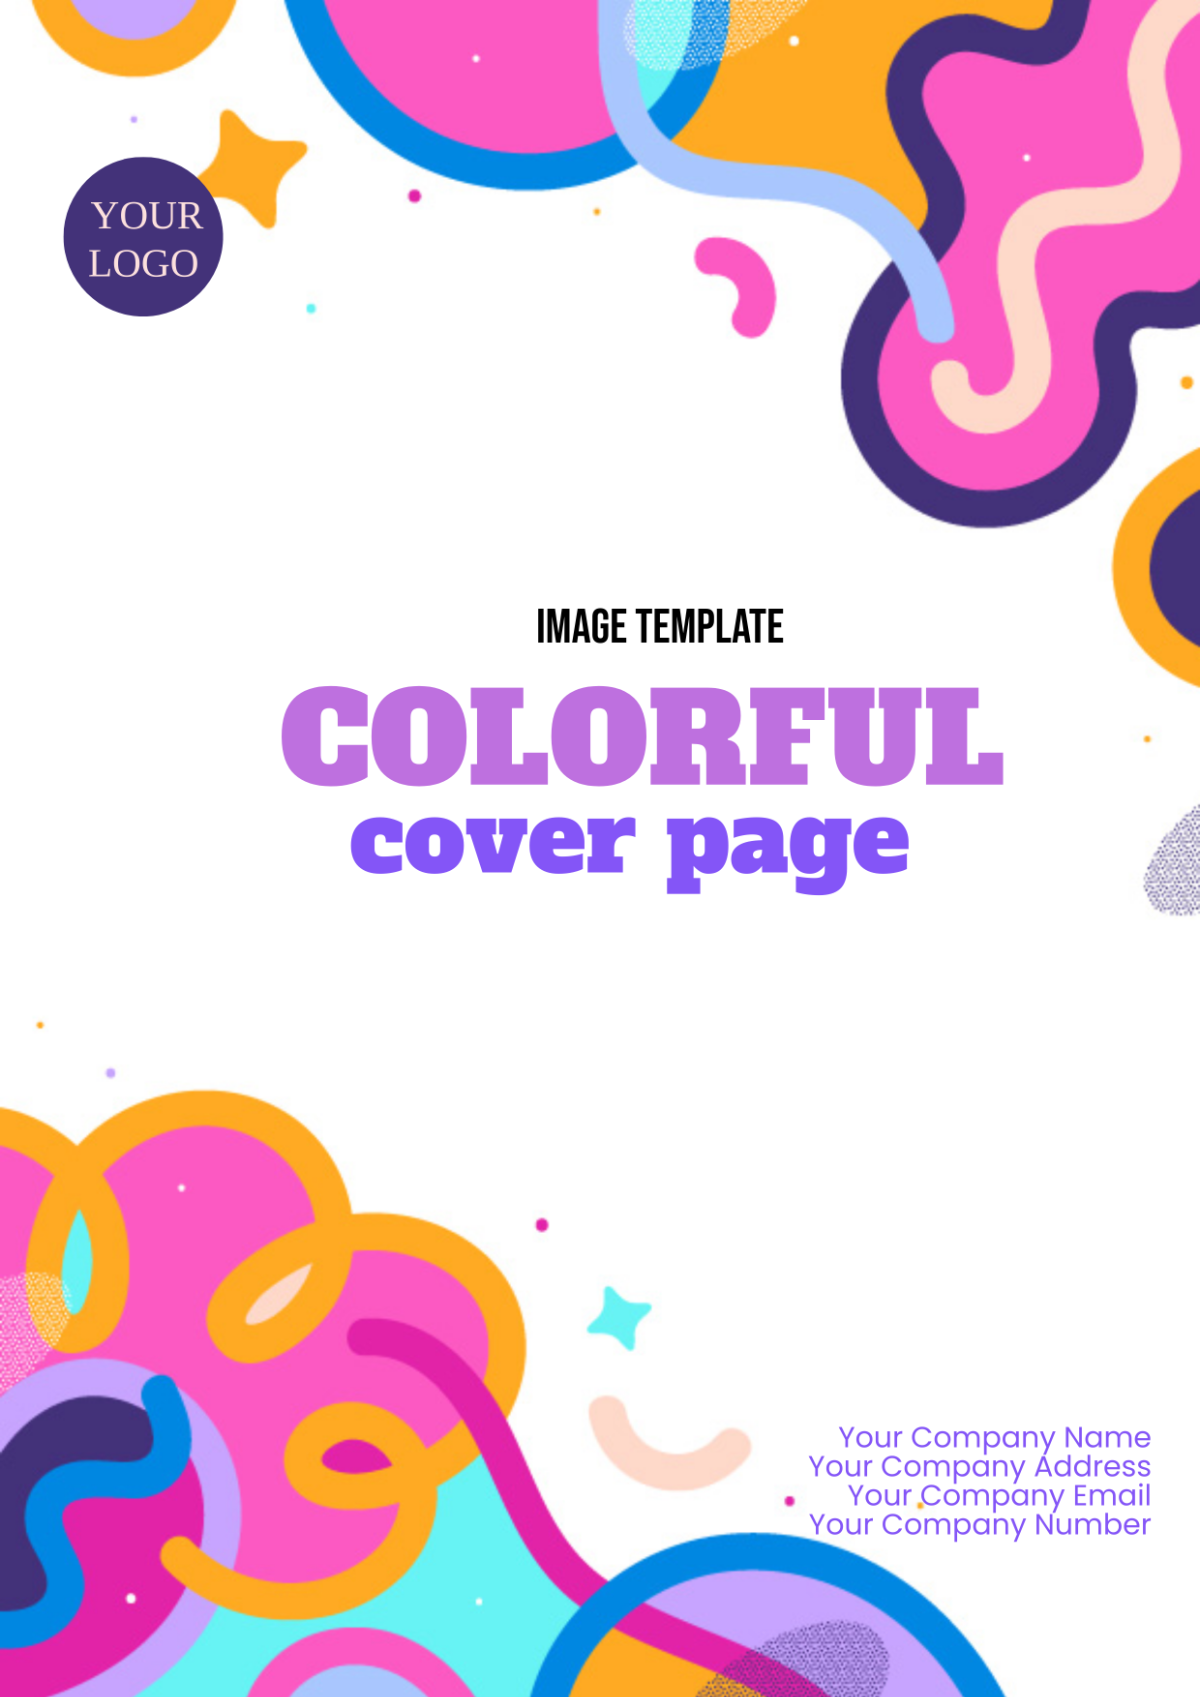 Colorful Cover Page Image